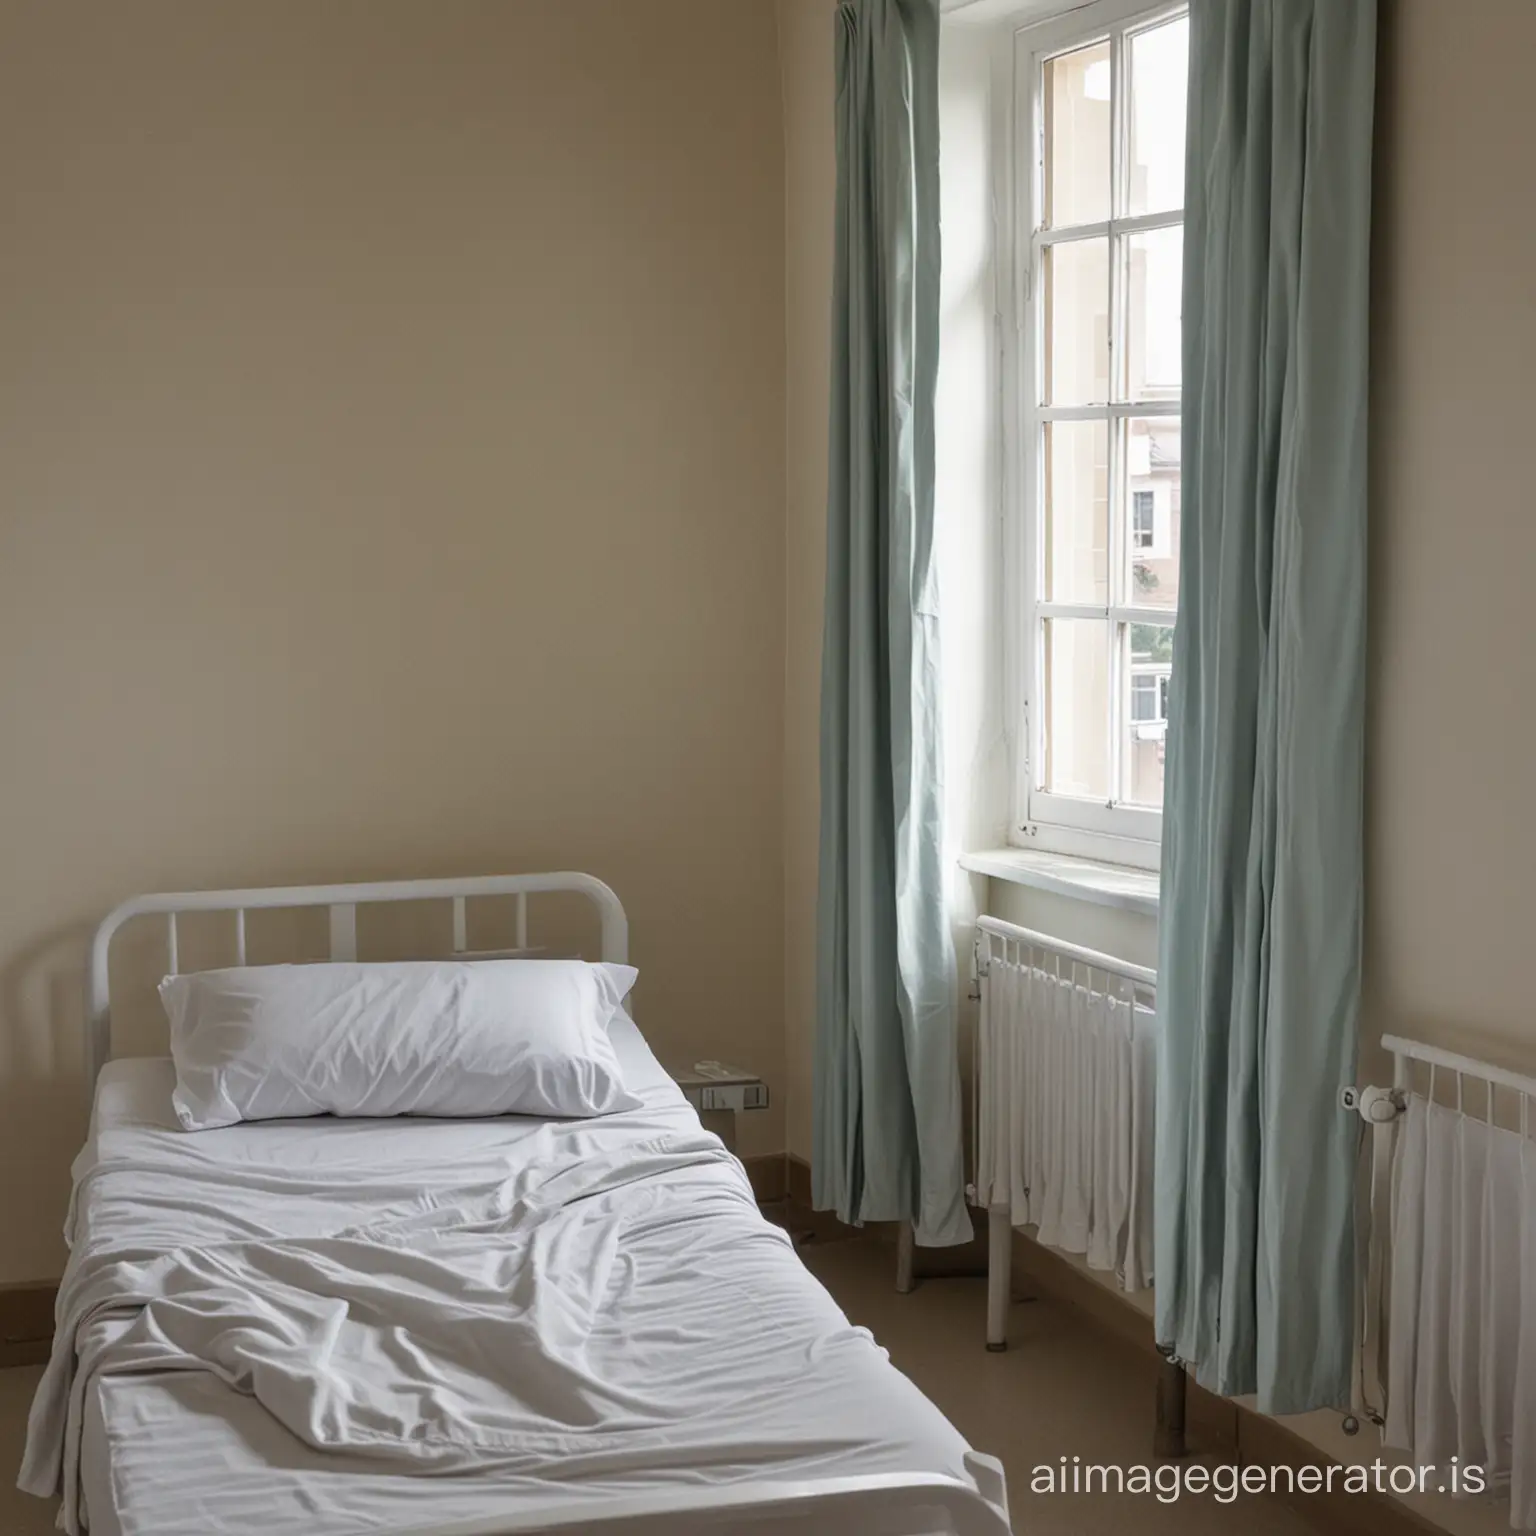 A ward in a psychiatric clinic bed close-up